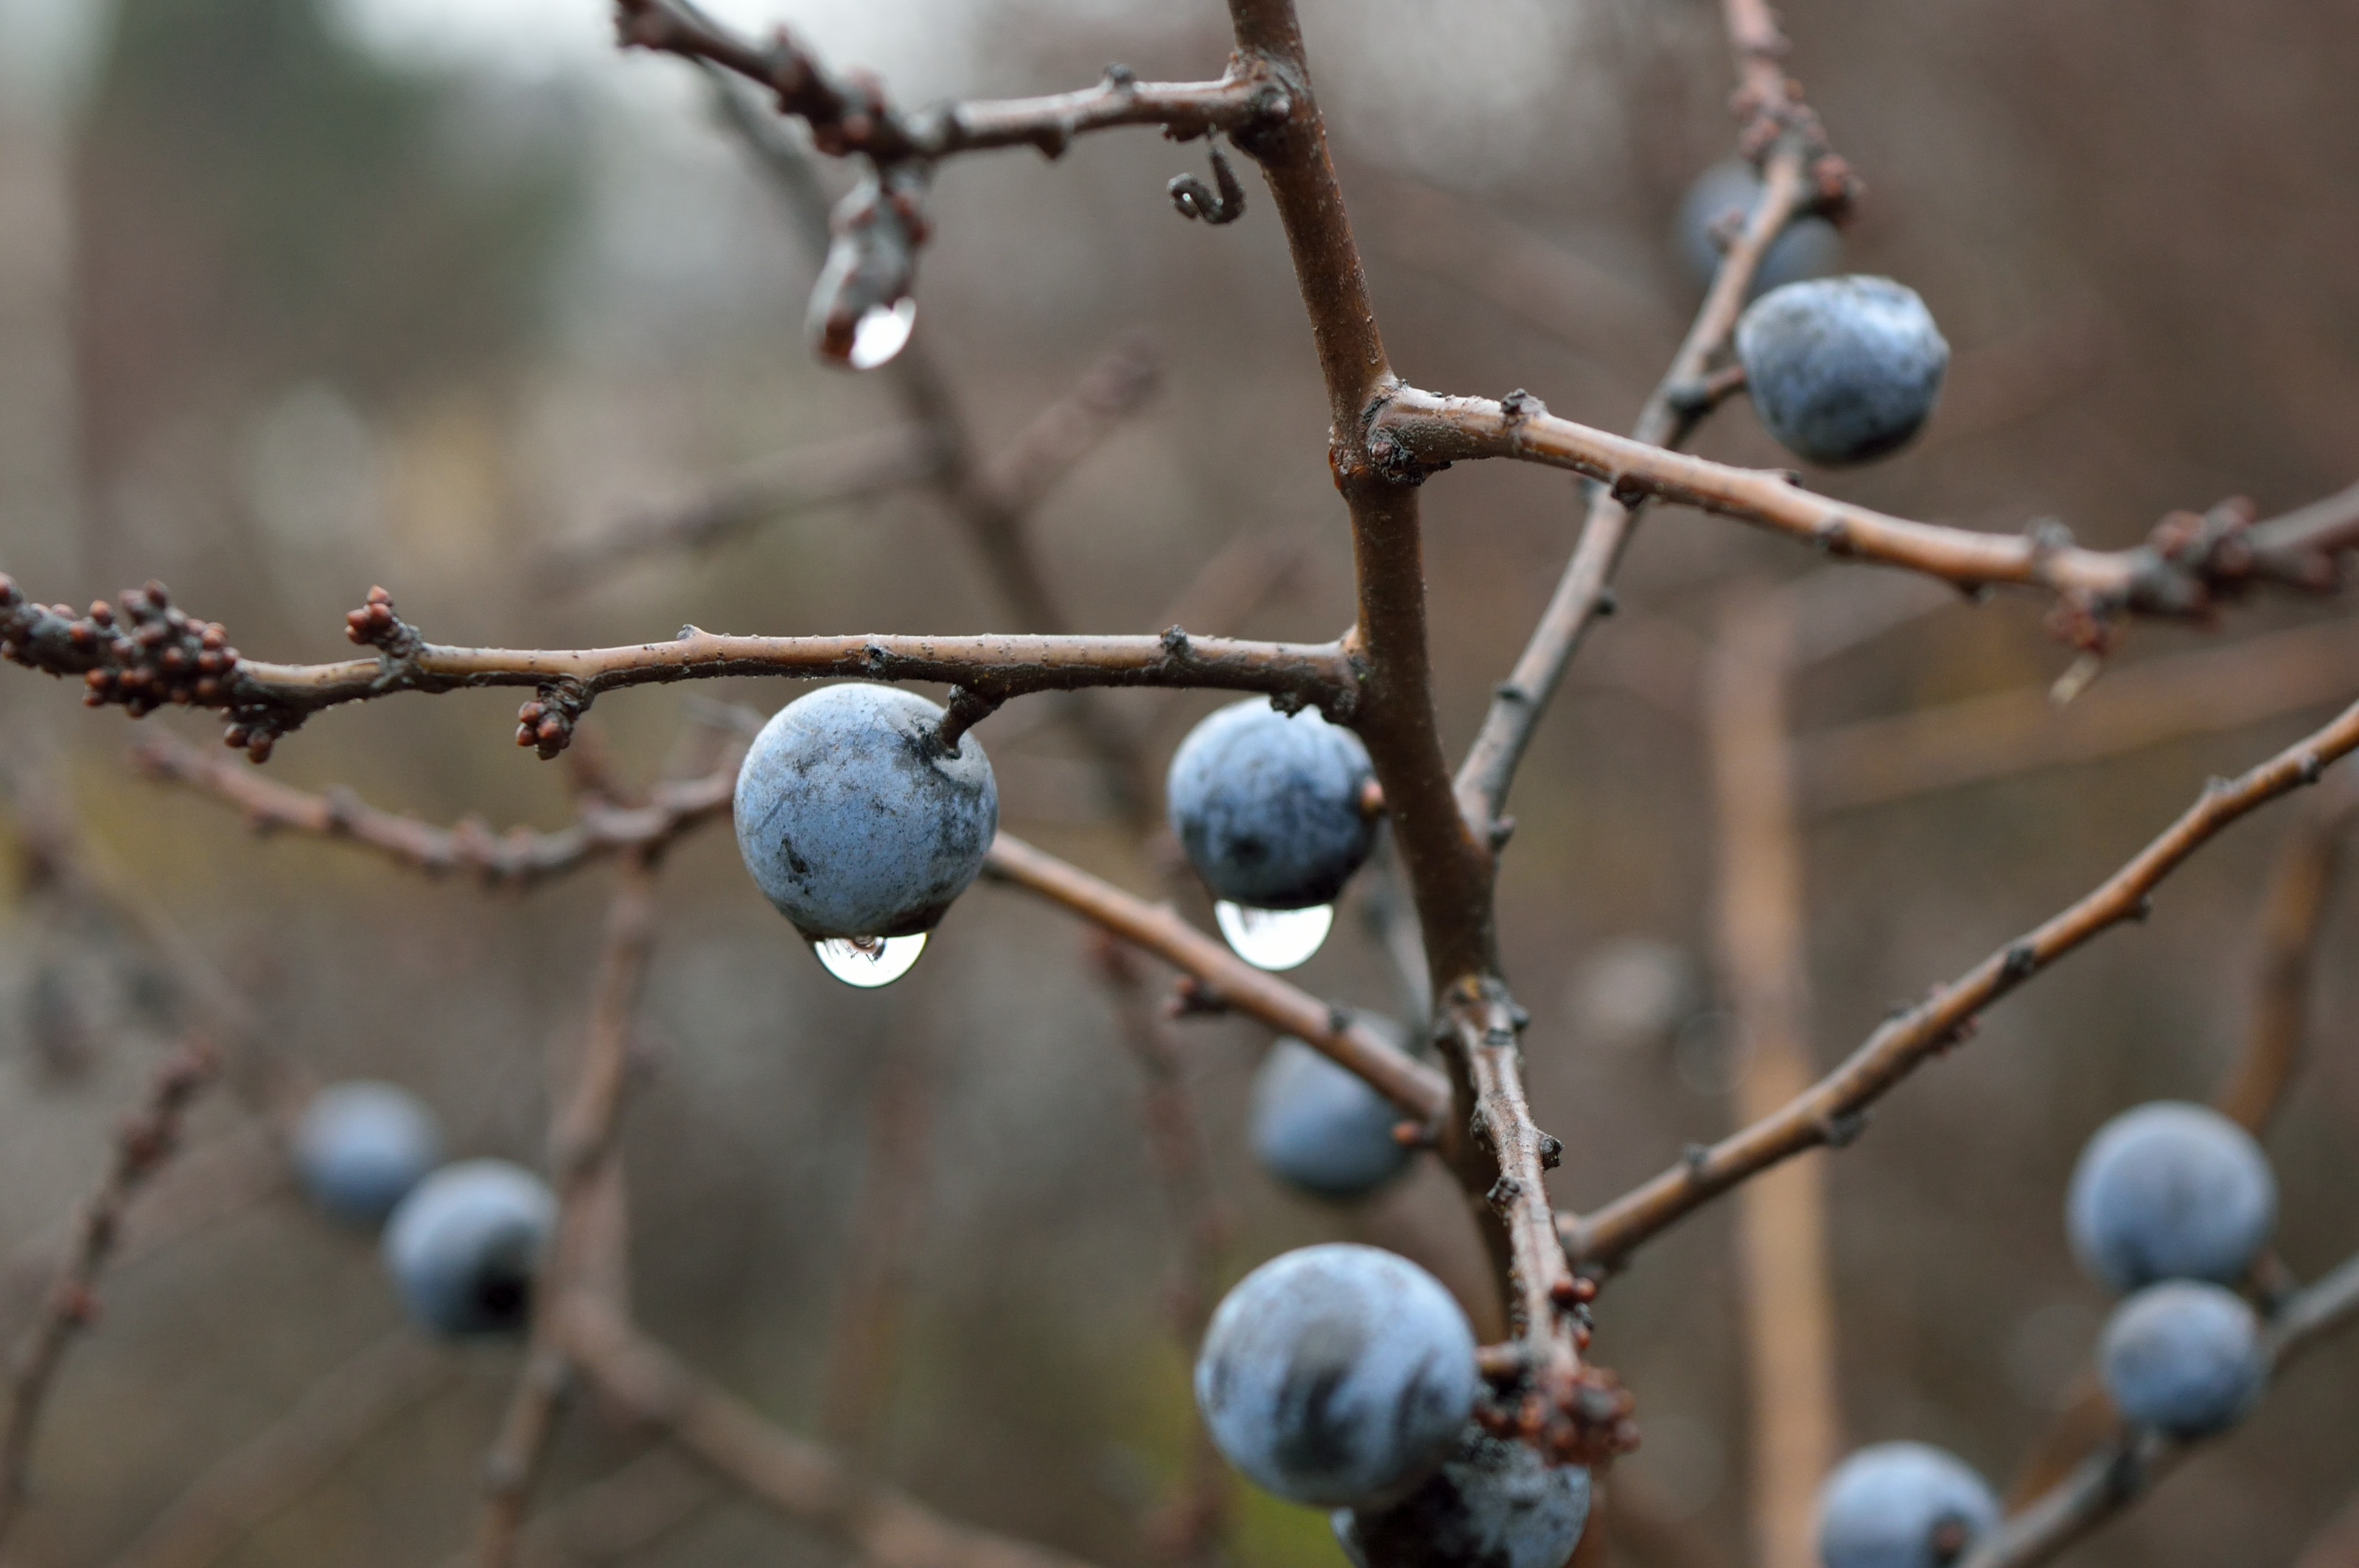 Sloe is used to condition the skin